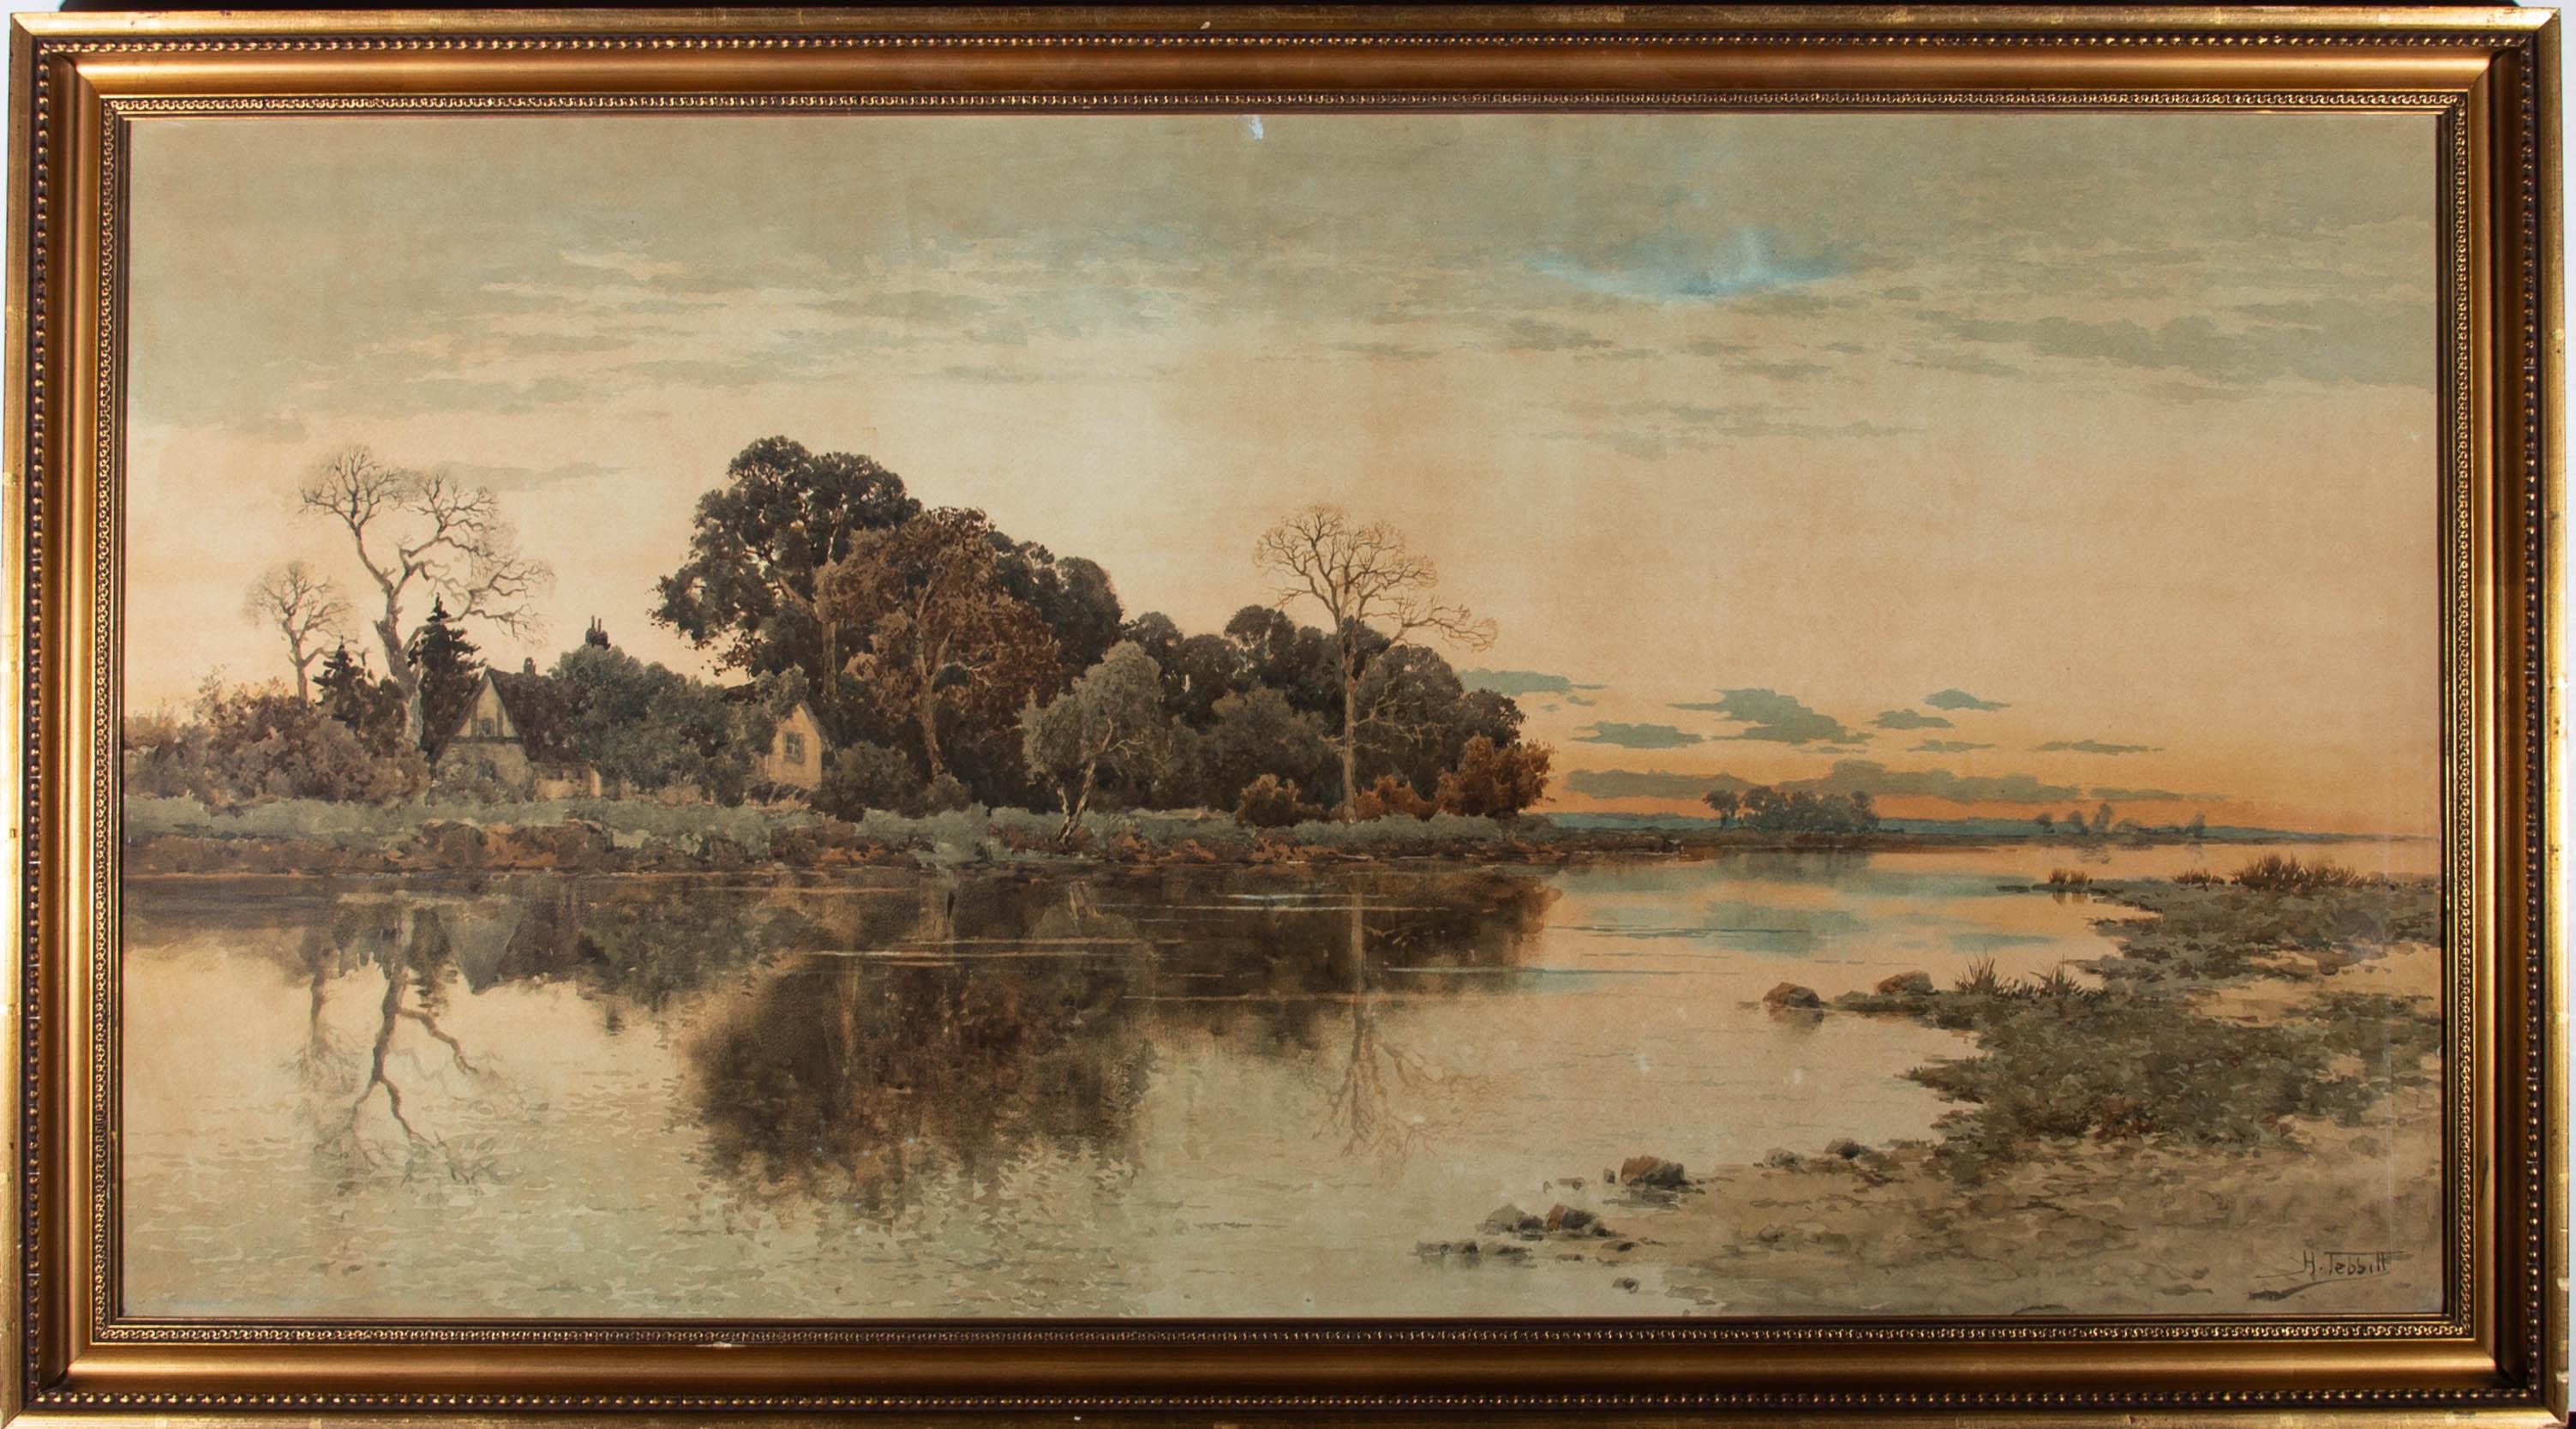 An impressively sized Edwardian watercolour landscape showing the panoramic view of a river meandering into the distance under a blushing sunset, reflected in the softly rippling water. There is a house nestled in a copse of trees to the left,